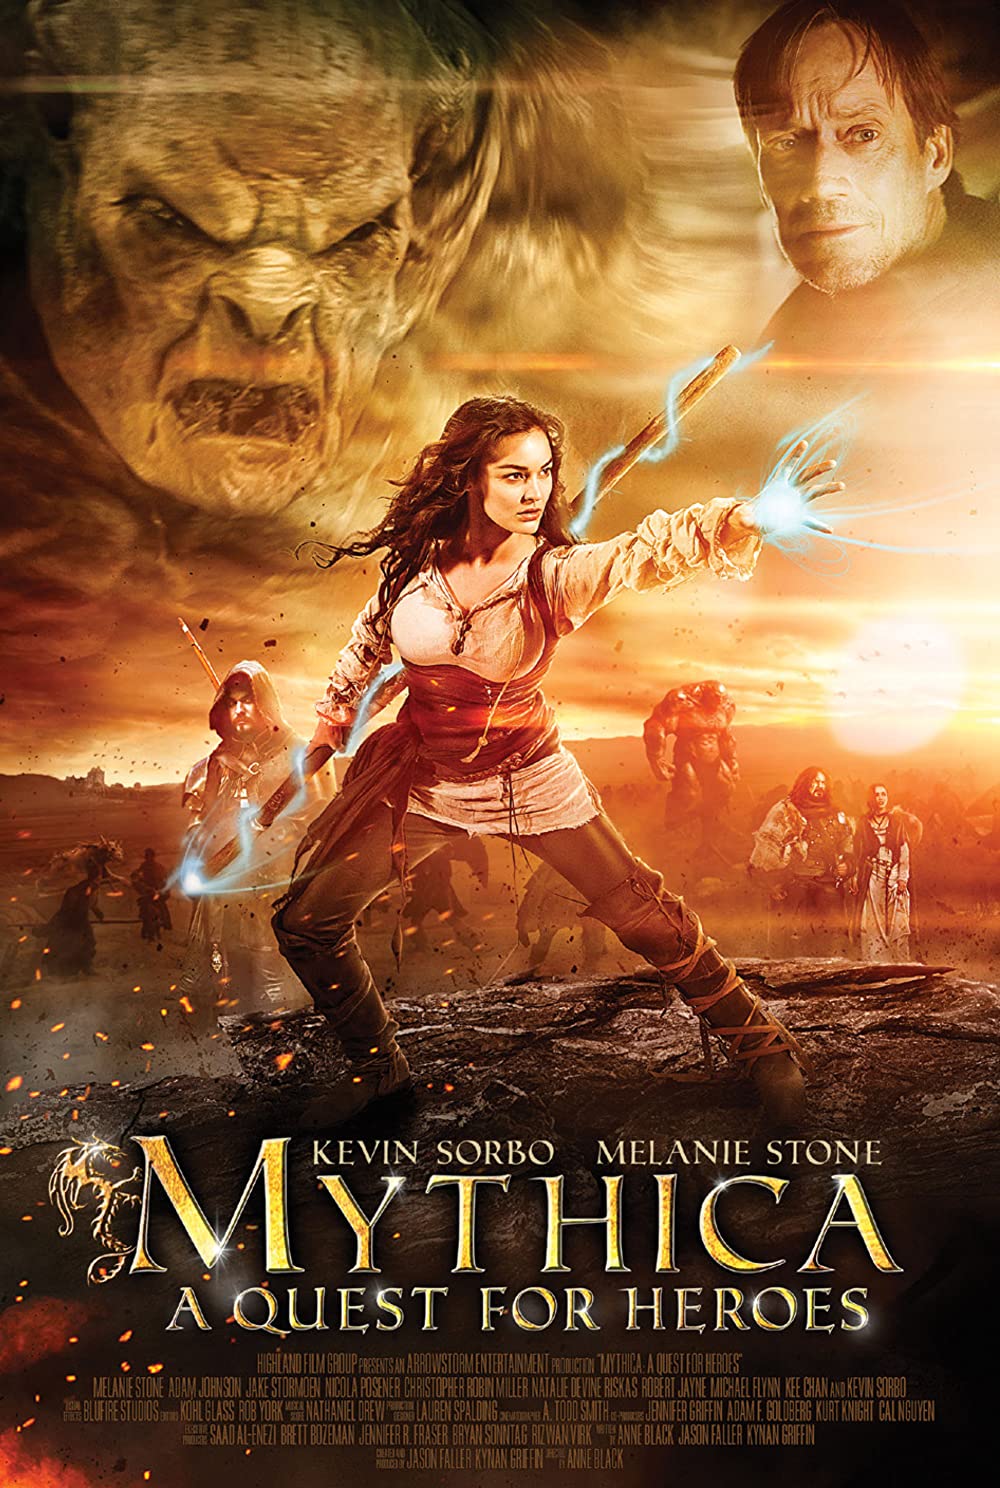 Mythica A Quest for Heroes 2014 Hindi Dubbed 480p BluRay ESub 310MB Download